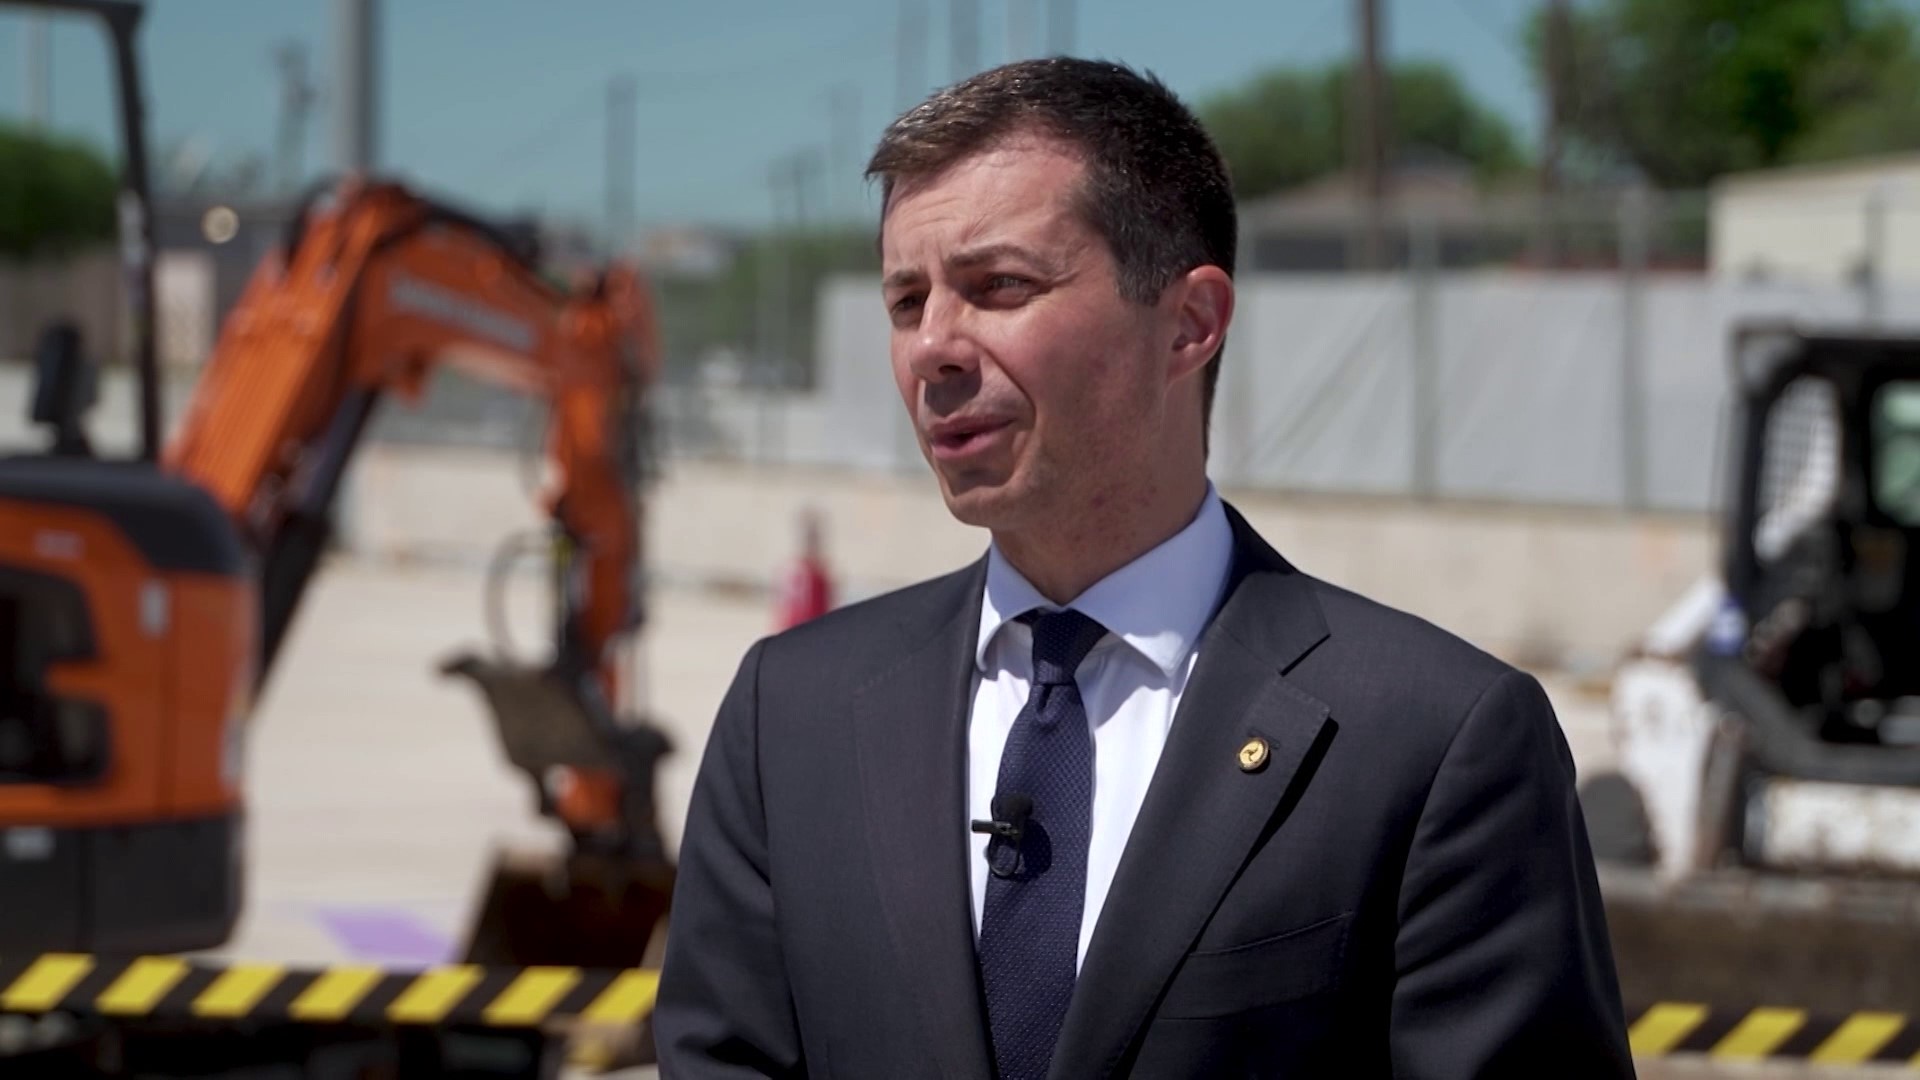 Pete Buttigieg says the federal government is spending billions to reconnect communities across the U.S., including four projects in north Texas.